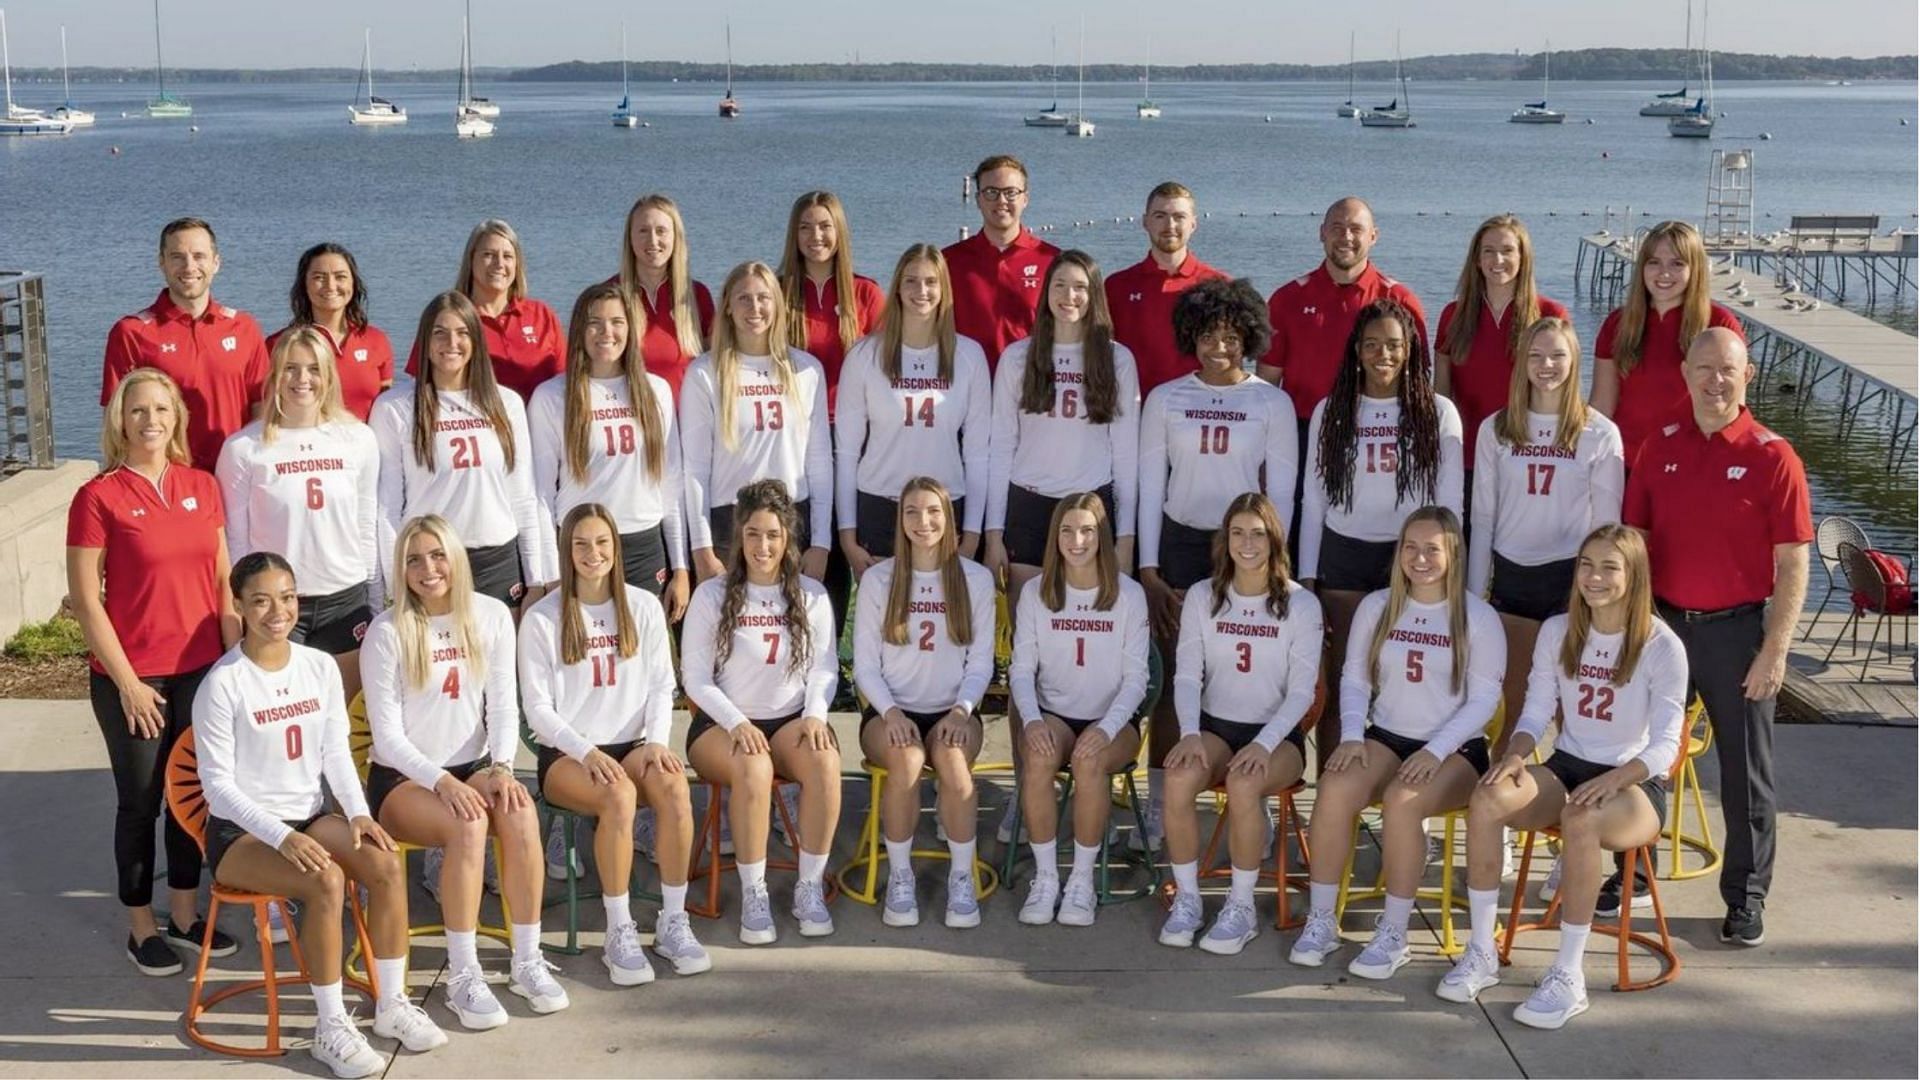 Wisconsin volleyball team leaked images unedited video reddit